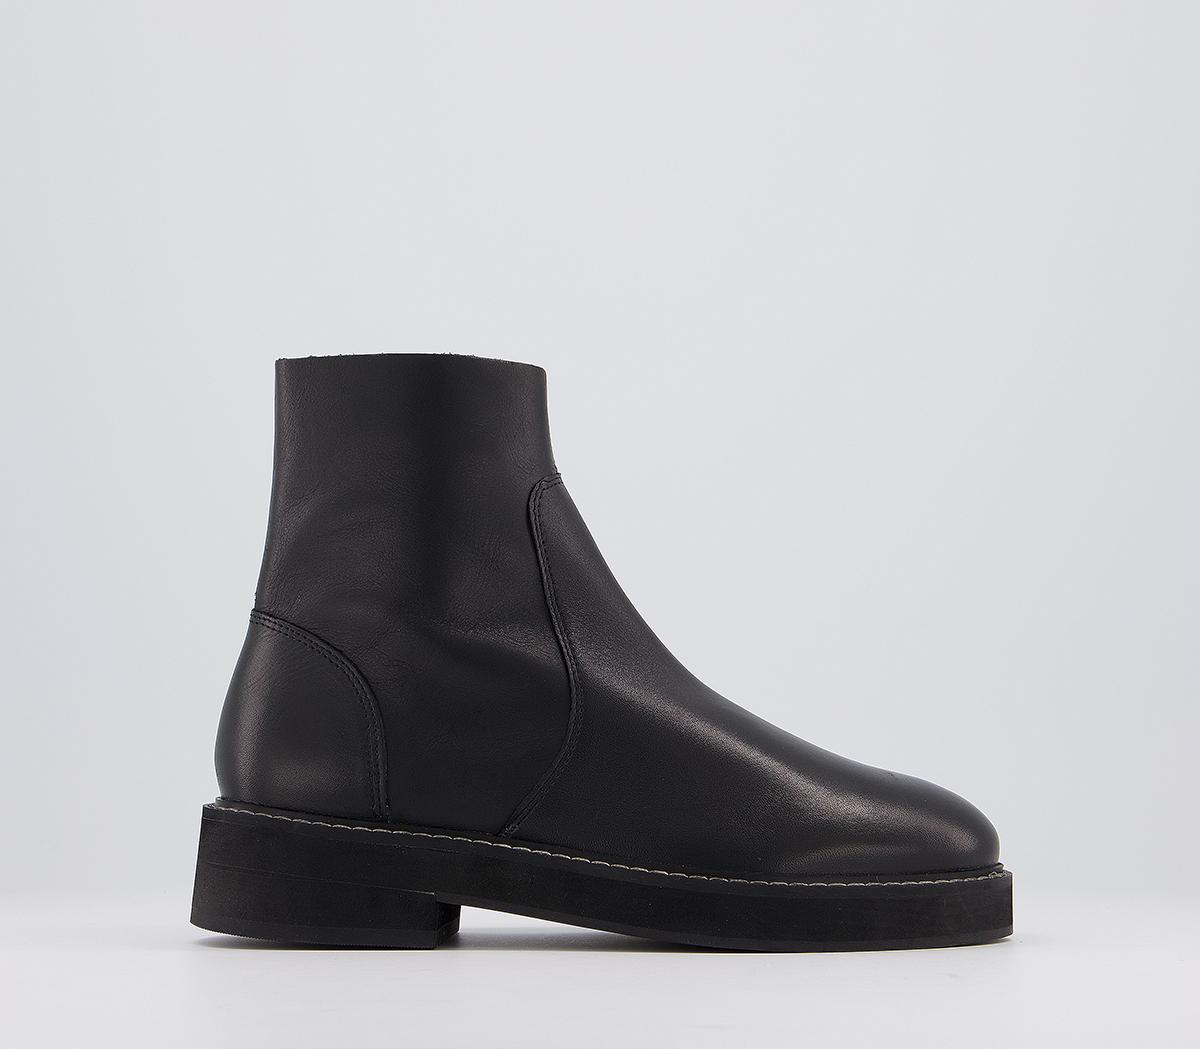 OFFICEAlign Smooth Sole Ankle BootsBlack Leather Mix